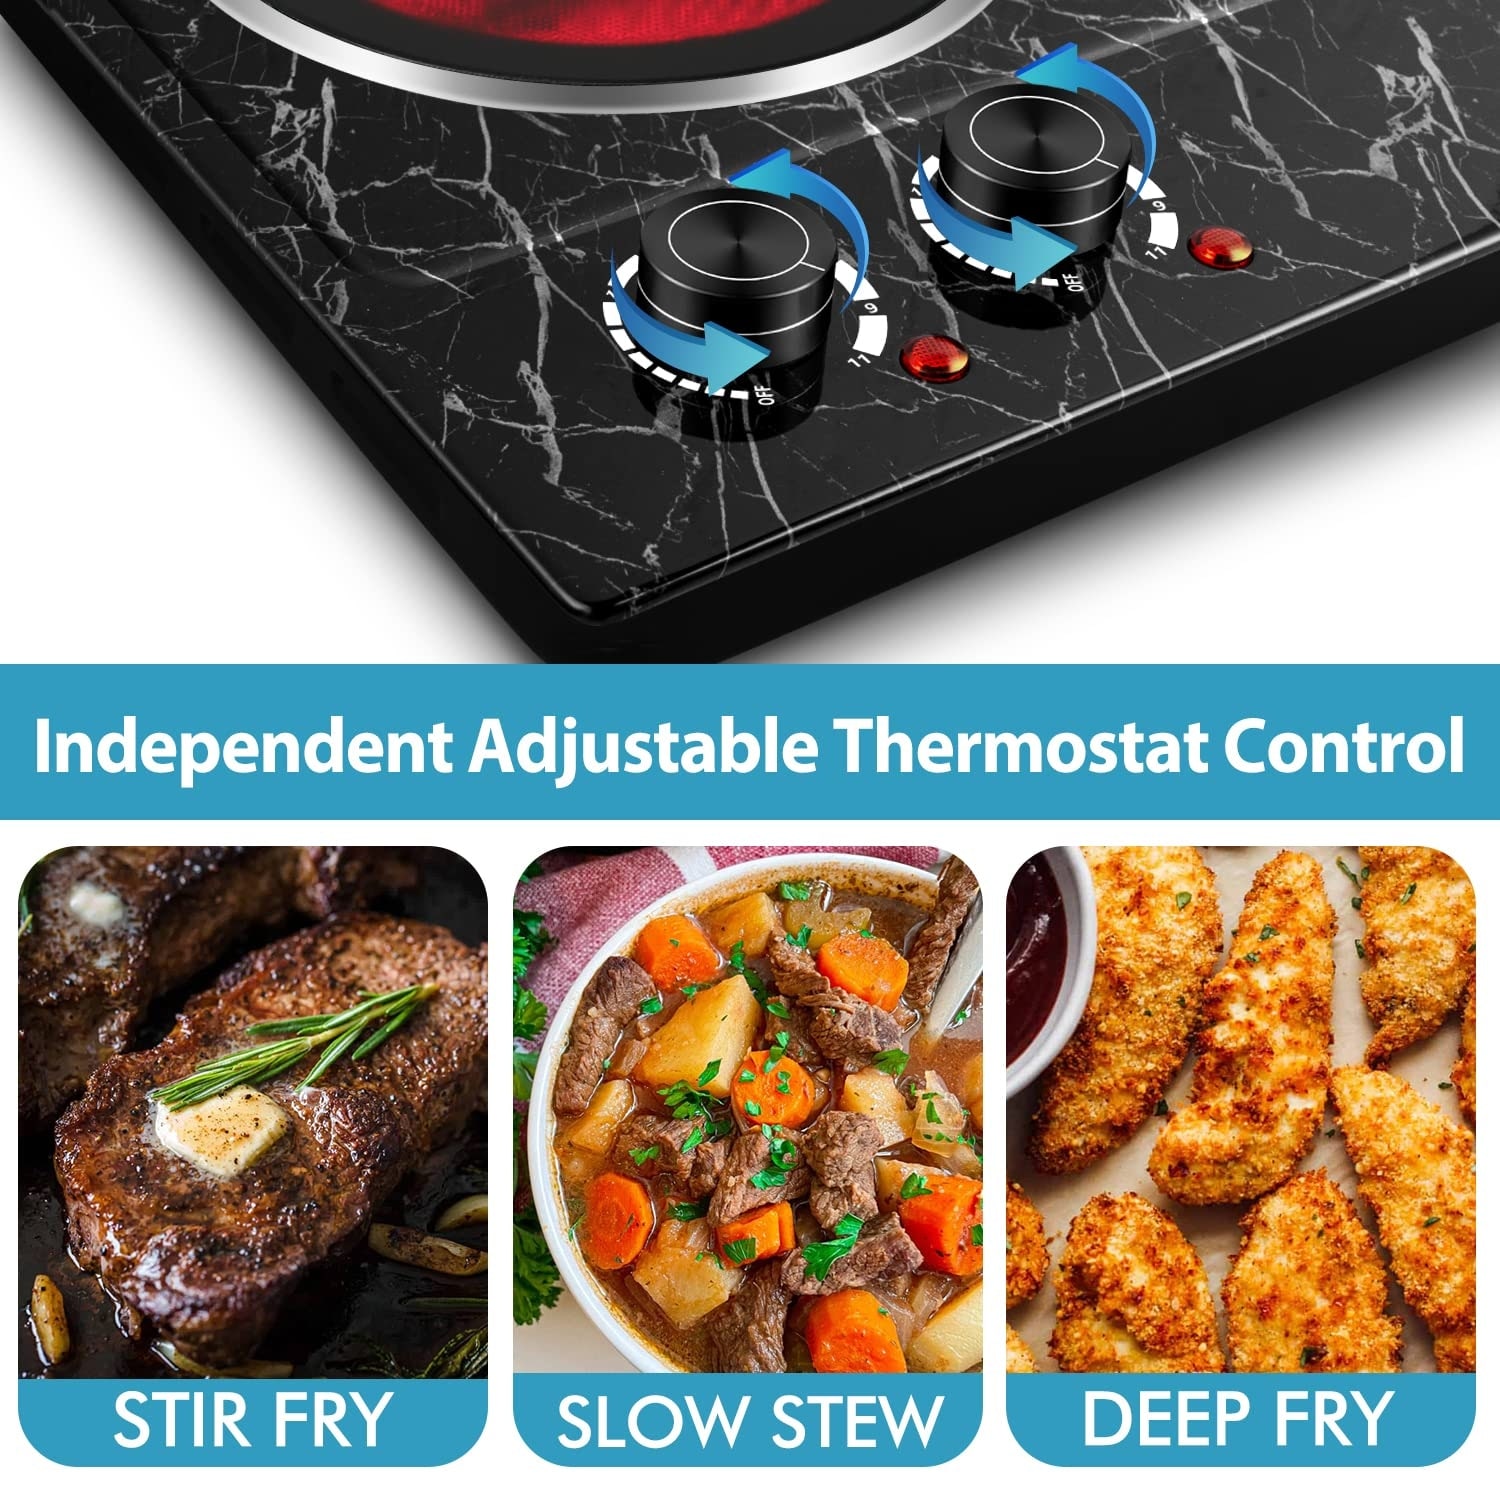 https://ak1.ostkcdn.com/images/products/is/images/direct/7e08f52fc9dabc6f7a6daa8a660a7a9320dc6cc7/Double-Burner-Hot-Plate-for-Cooking%2C-1800W-Dual-Control-Portable-Stove-Countertop-Electric-Burner-Infrared-Cooktop.jpg